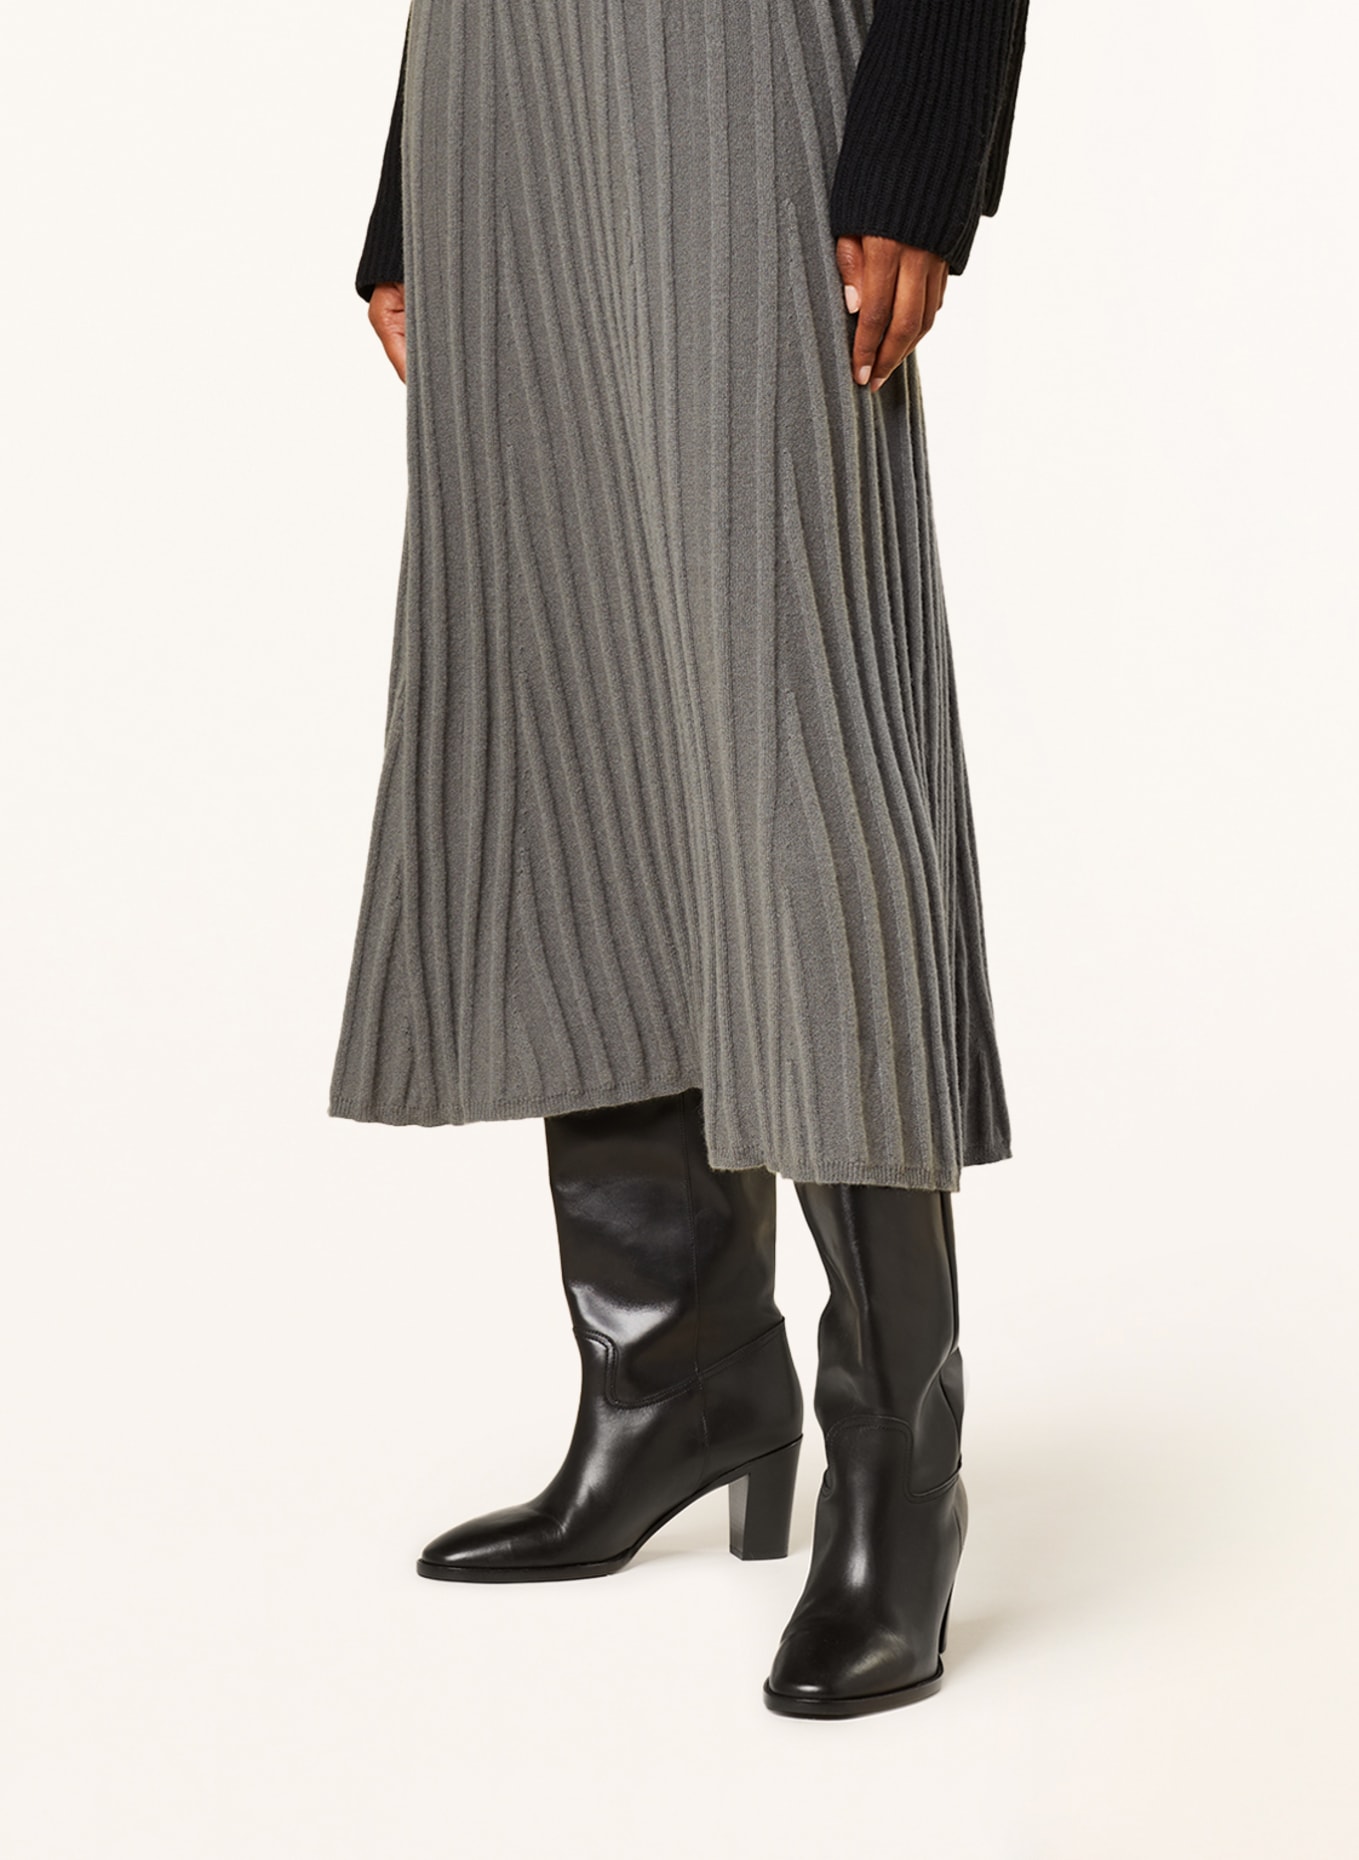 HEMISPHERE Knit skirt in cashmere, Color: GRAY (Image 4)